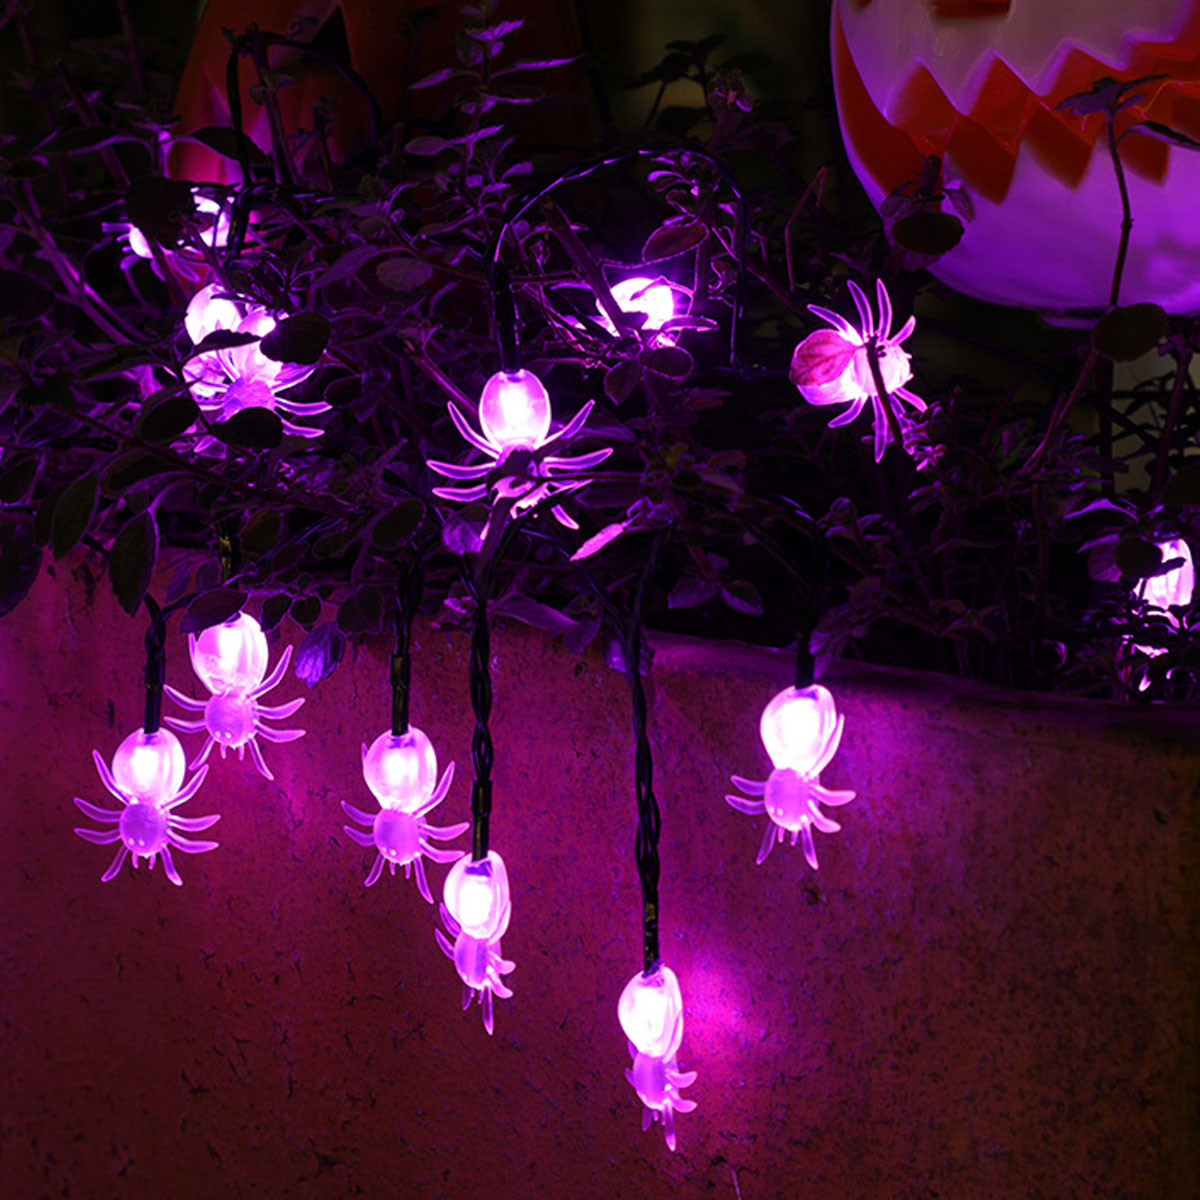 65M-30-LED-Ball-Solar-Halloween-Party-Fairy-Outdoor-String-Lights-for-Patio-Garden-8-Mode-Adjustment-1741092-9